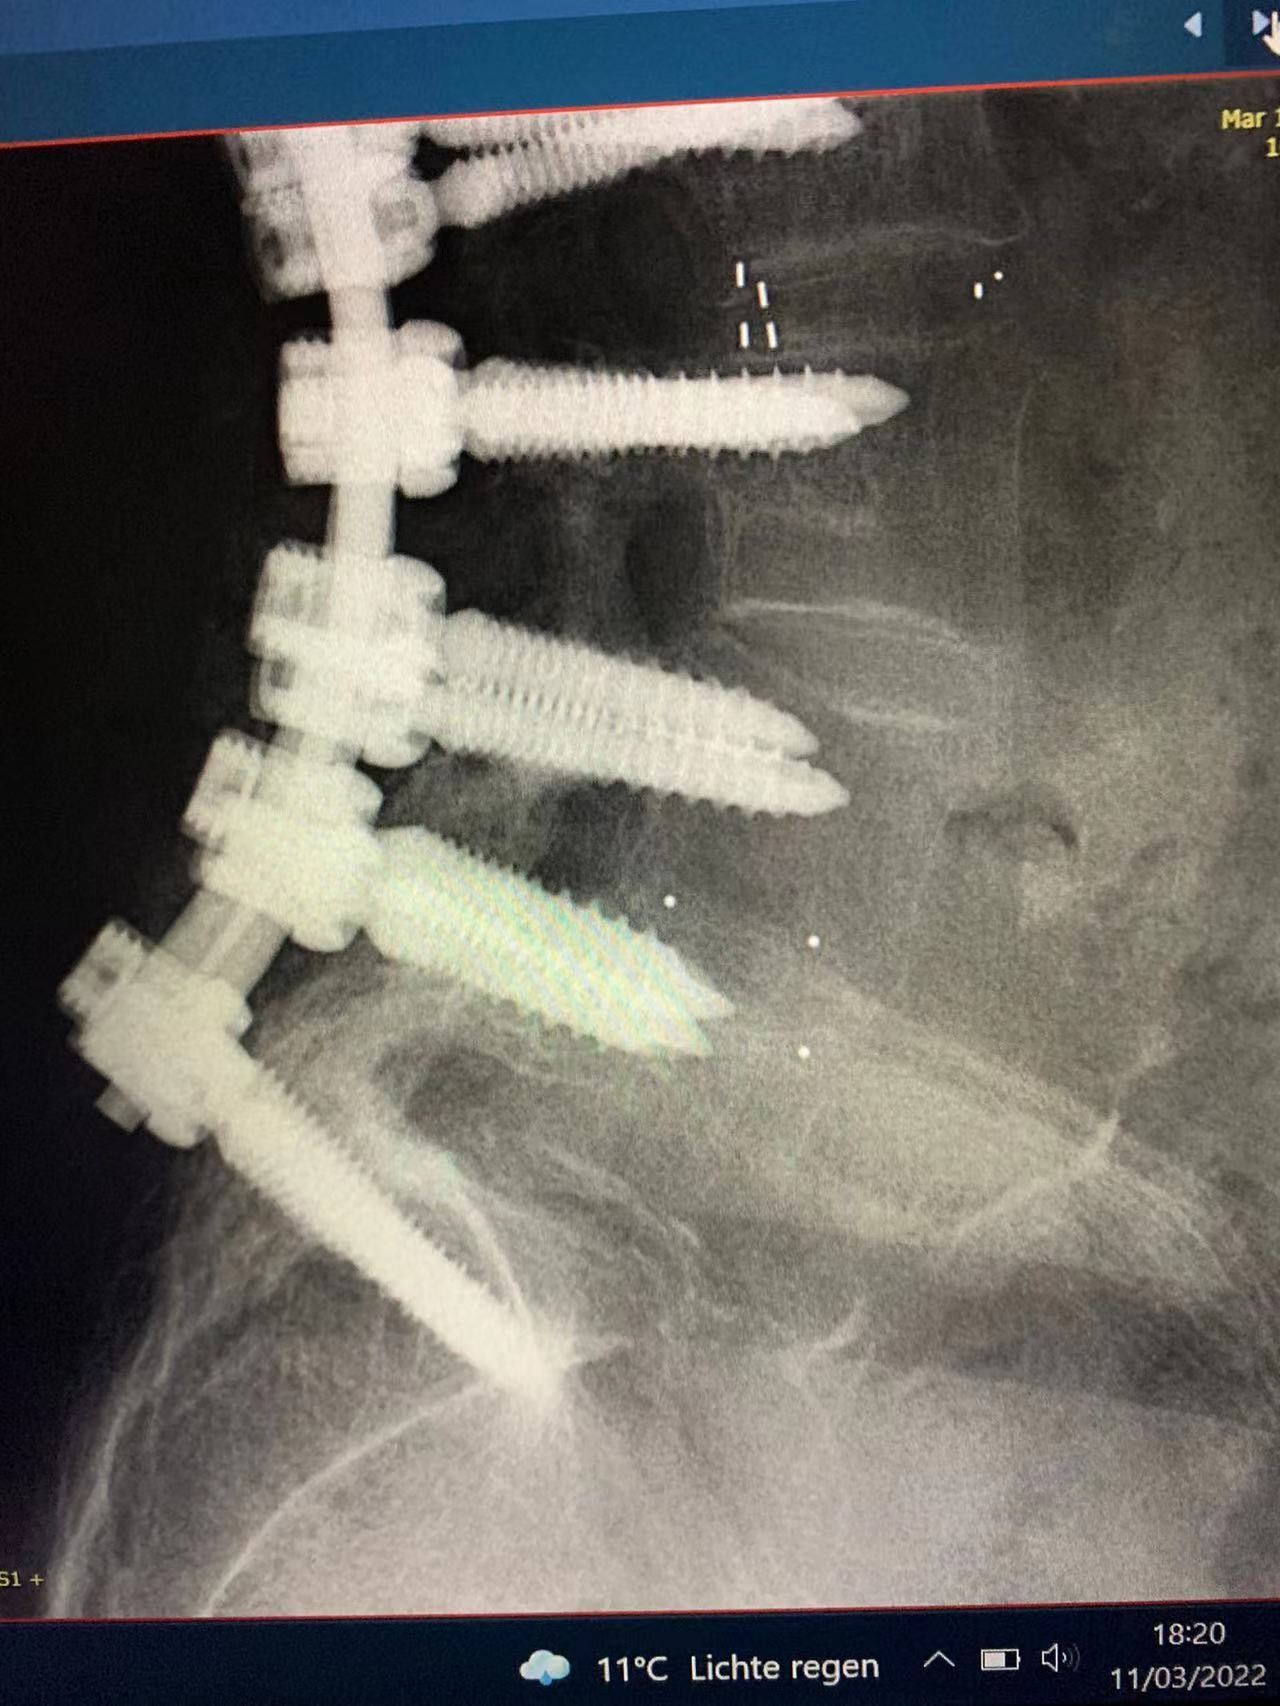 Latest company case about Successful Spinal Surgical Internal Fixation